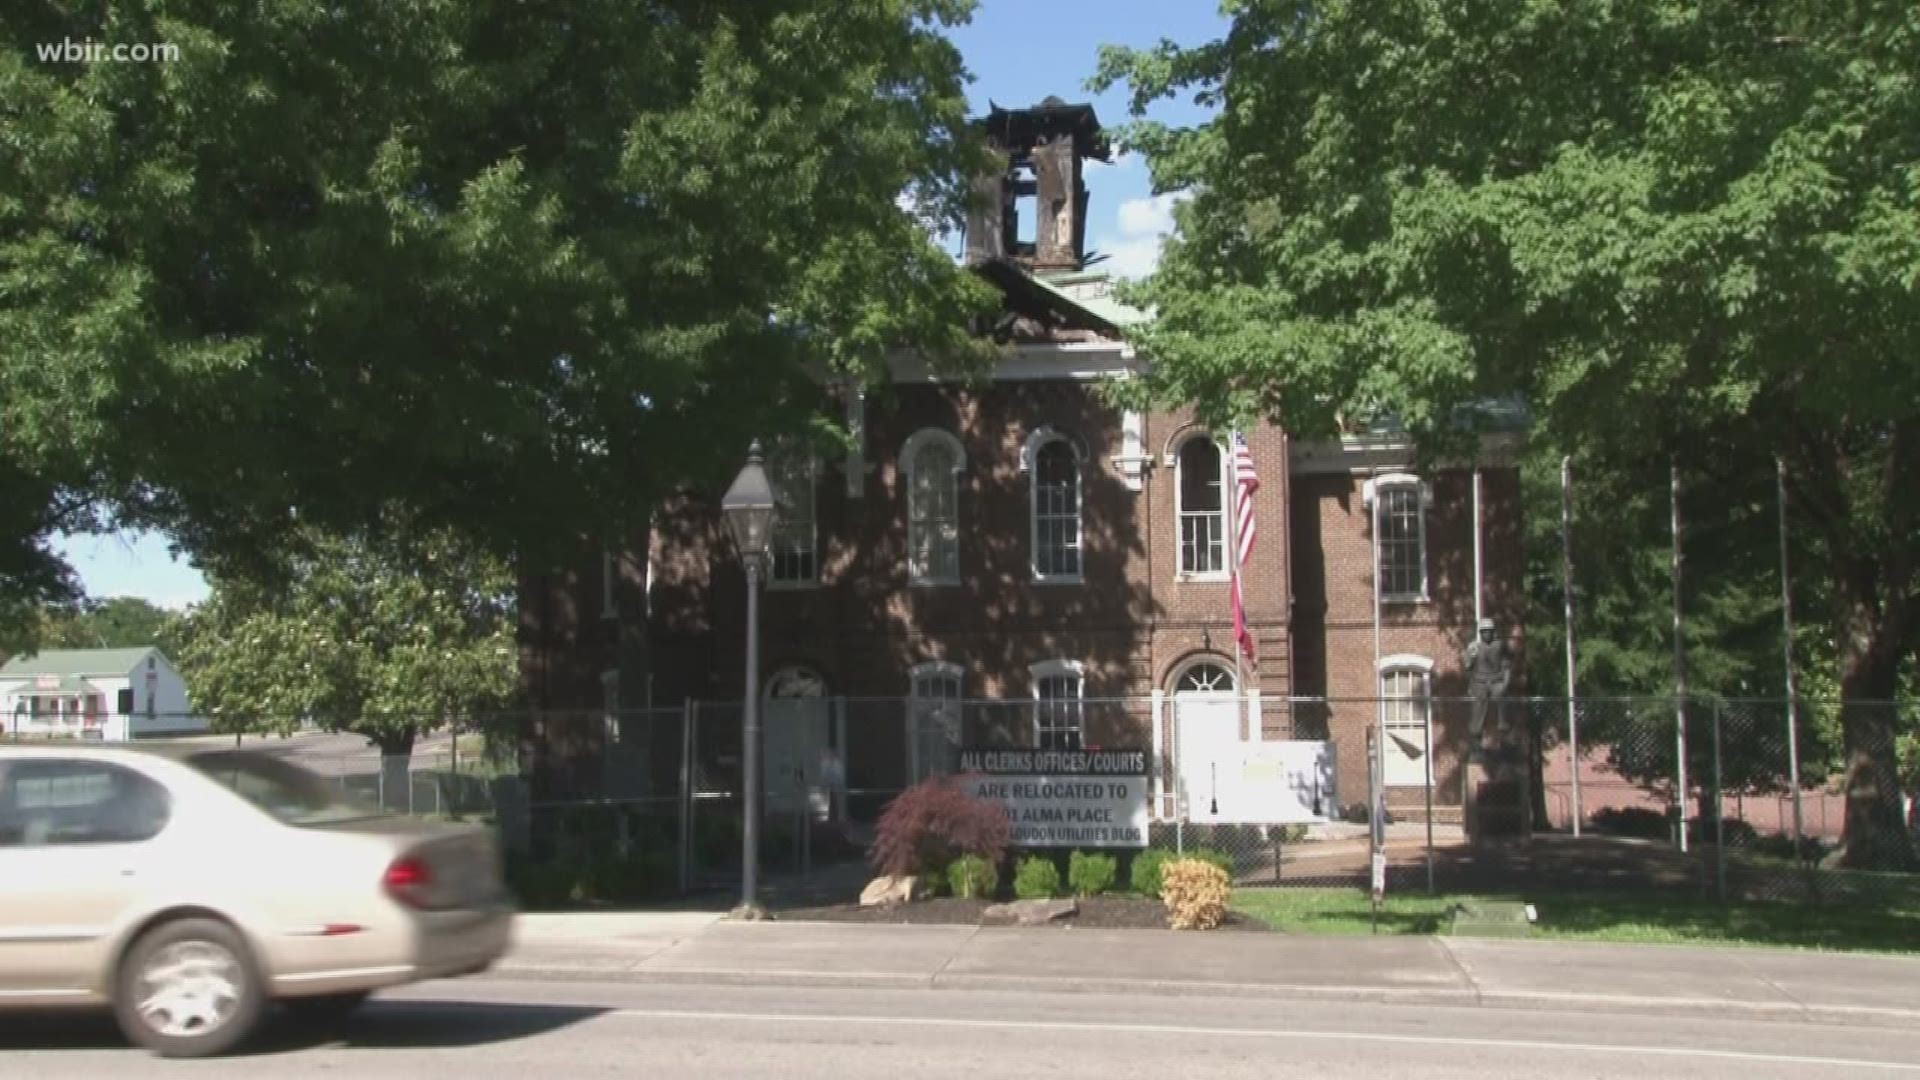 Loudon County leaders discussed the future of the historic courthouse following last month's fire. Mayor Buddy Bradshaw says they hope to rebuild the historic courthouse and use it as a venue and storage area for records.